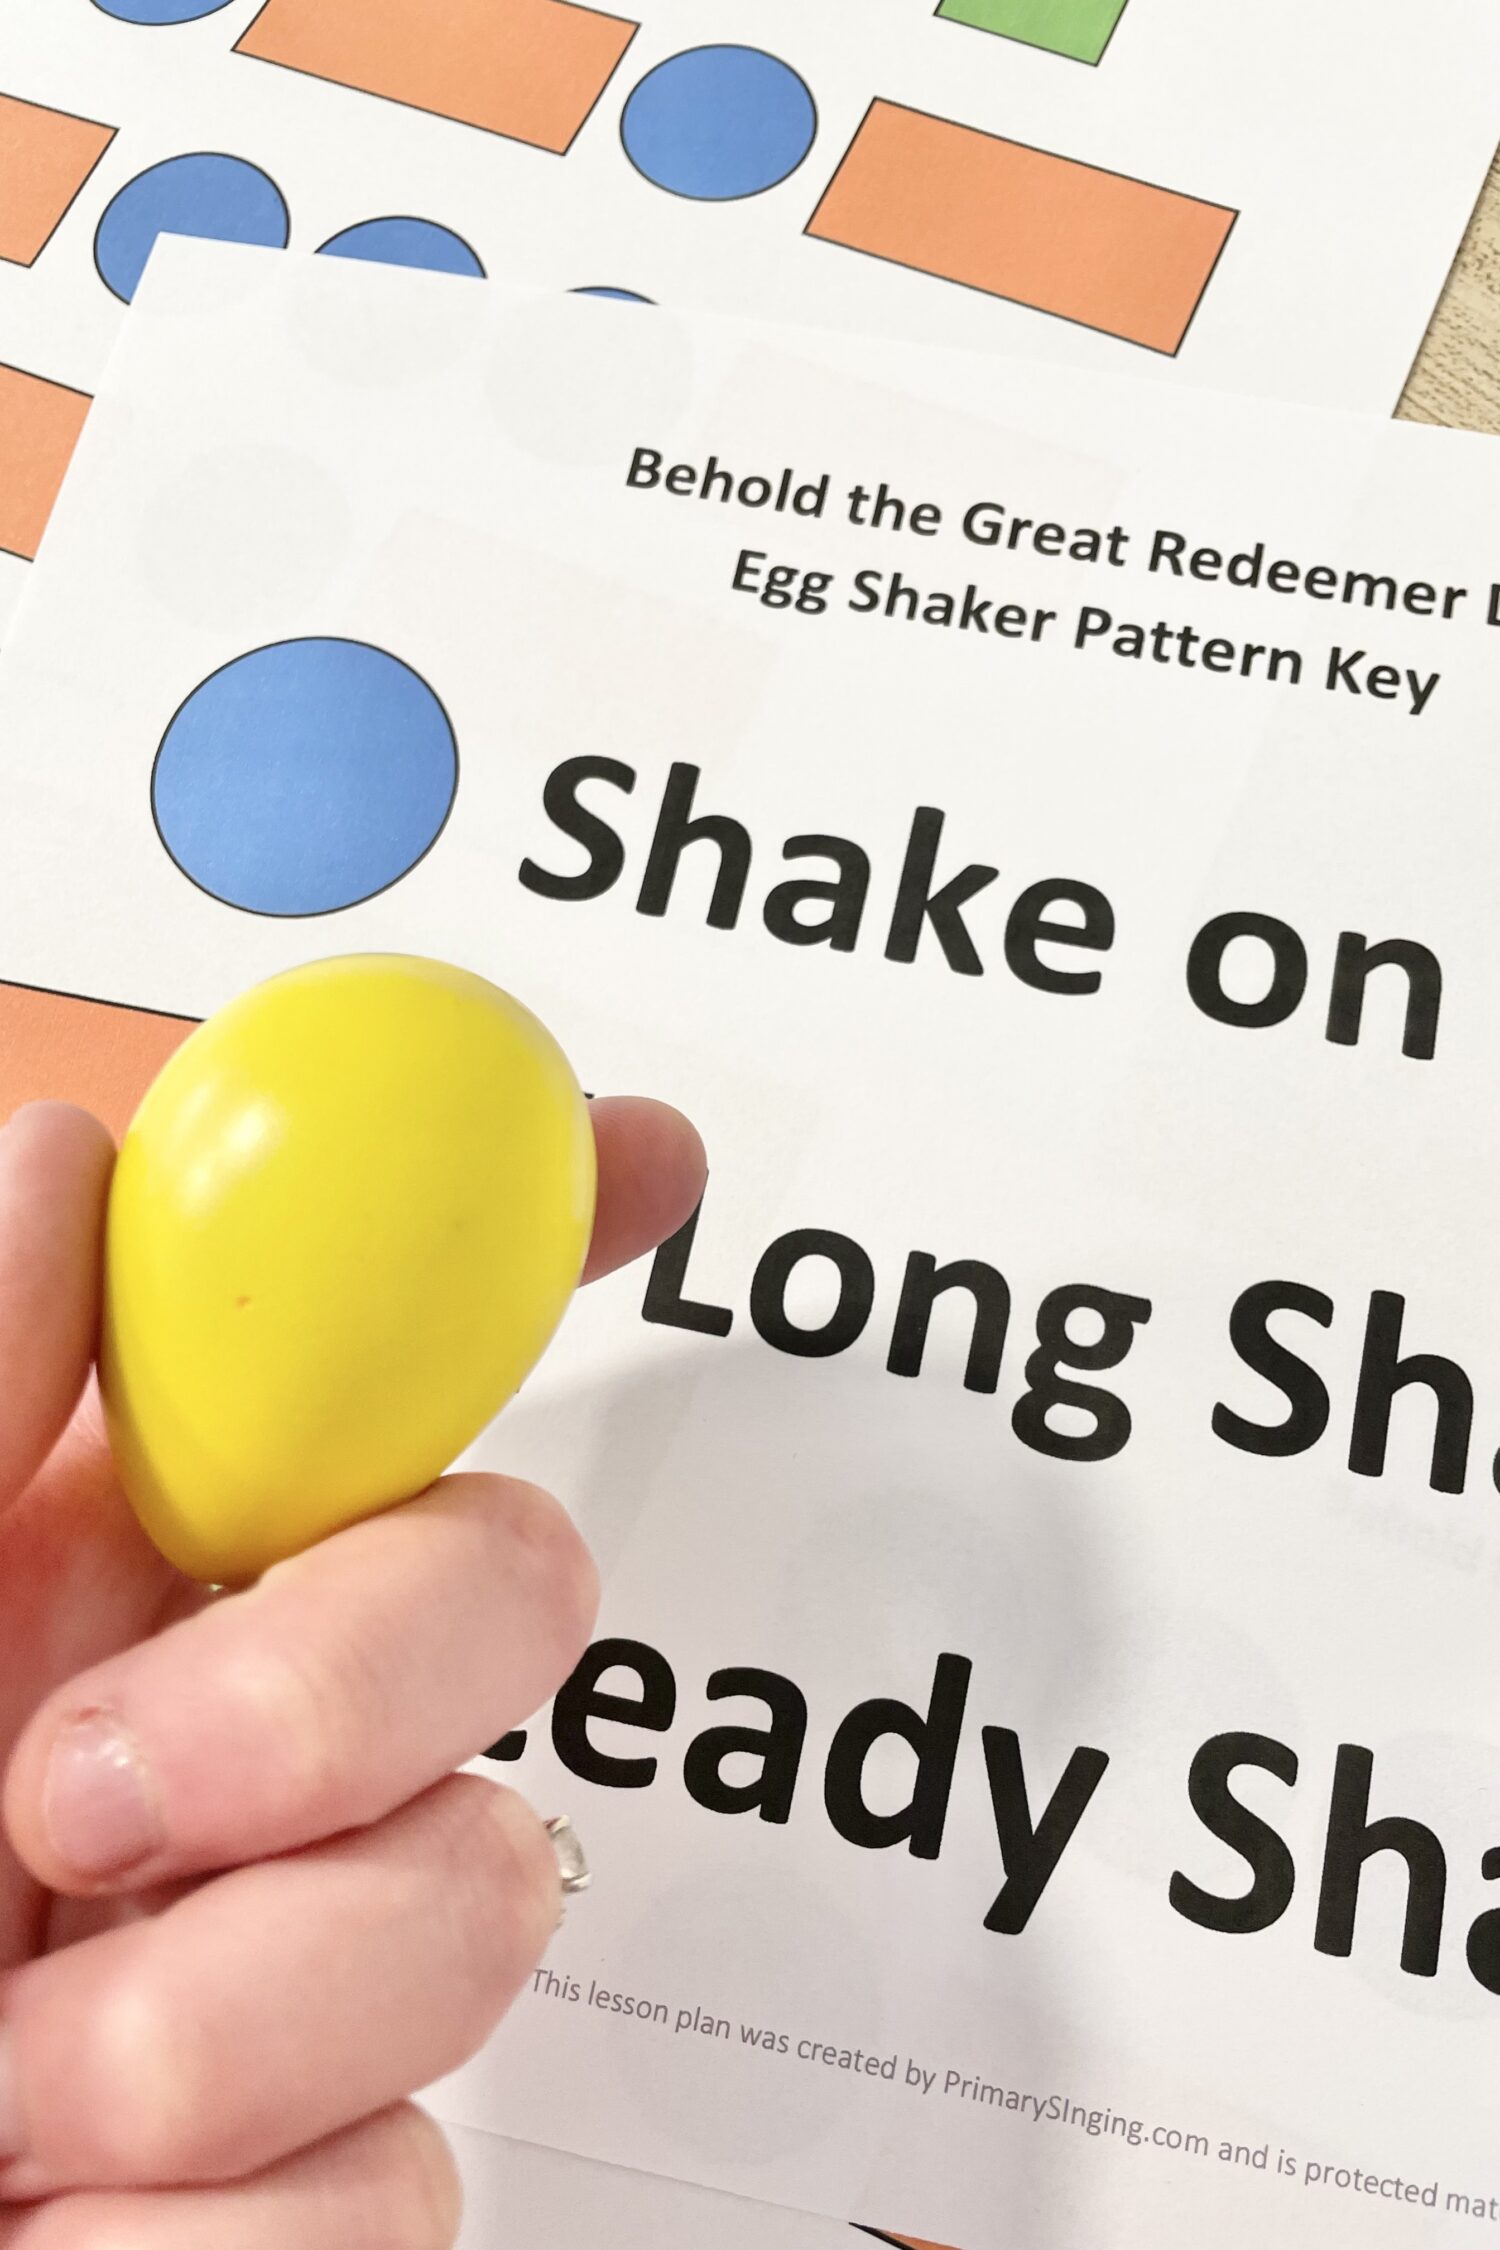 Behold the Great Redeemer Die Egg Shakers! Use this egg shaker pattern with 3 rhythms to review this Come Follow Me New Testament song for LDS Primary Music Leaders.